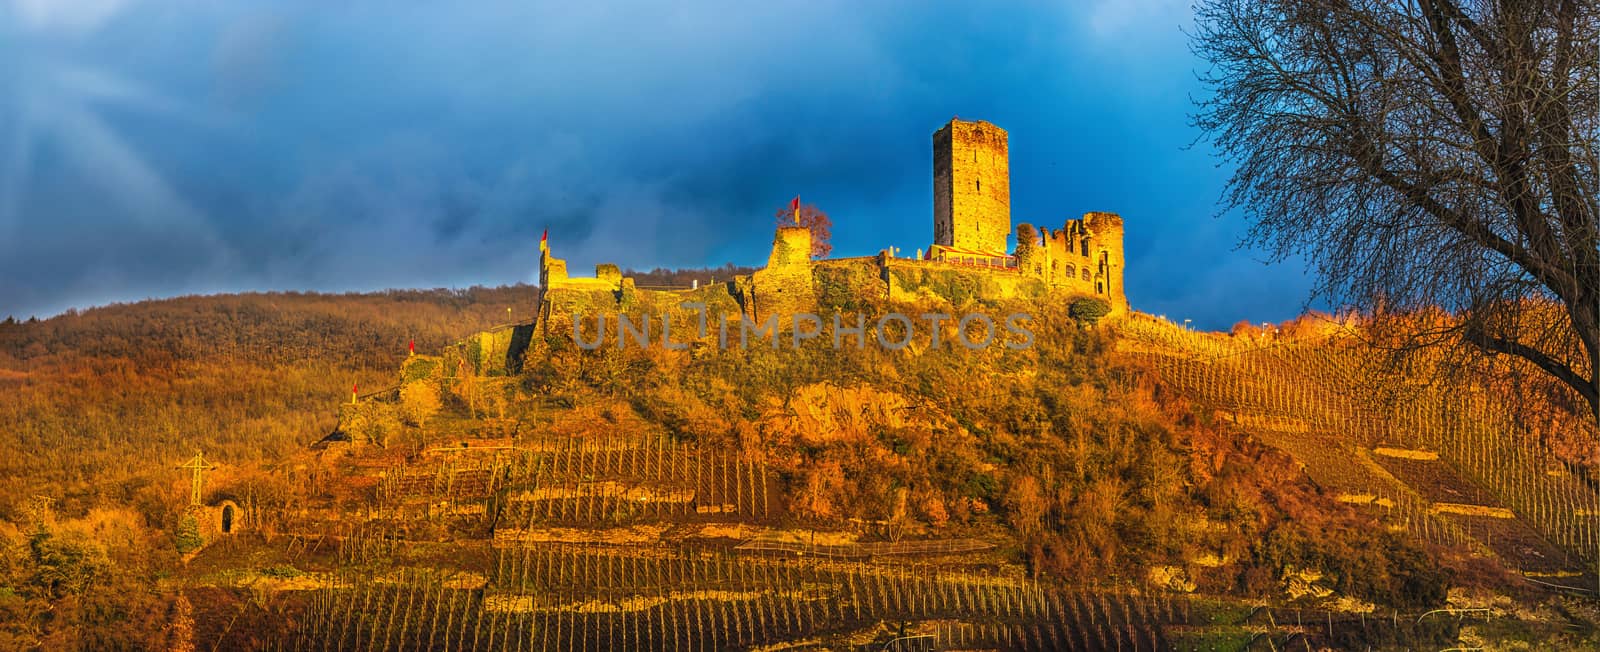 Artistic work of my own. HDR processing.  Old Postcard.
Panorama, Burg Metternich on the Mosel in Germany against a dramatic sky.